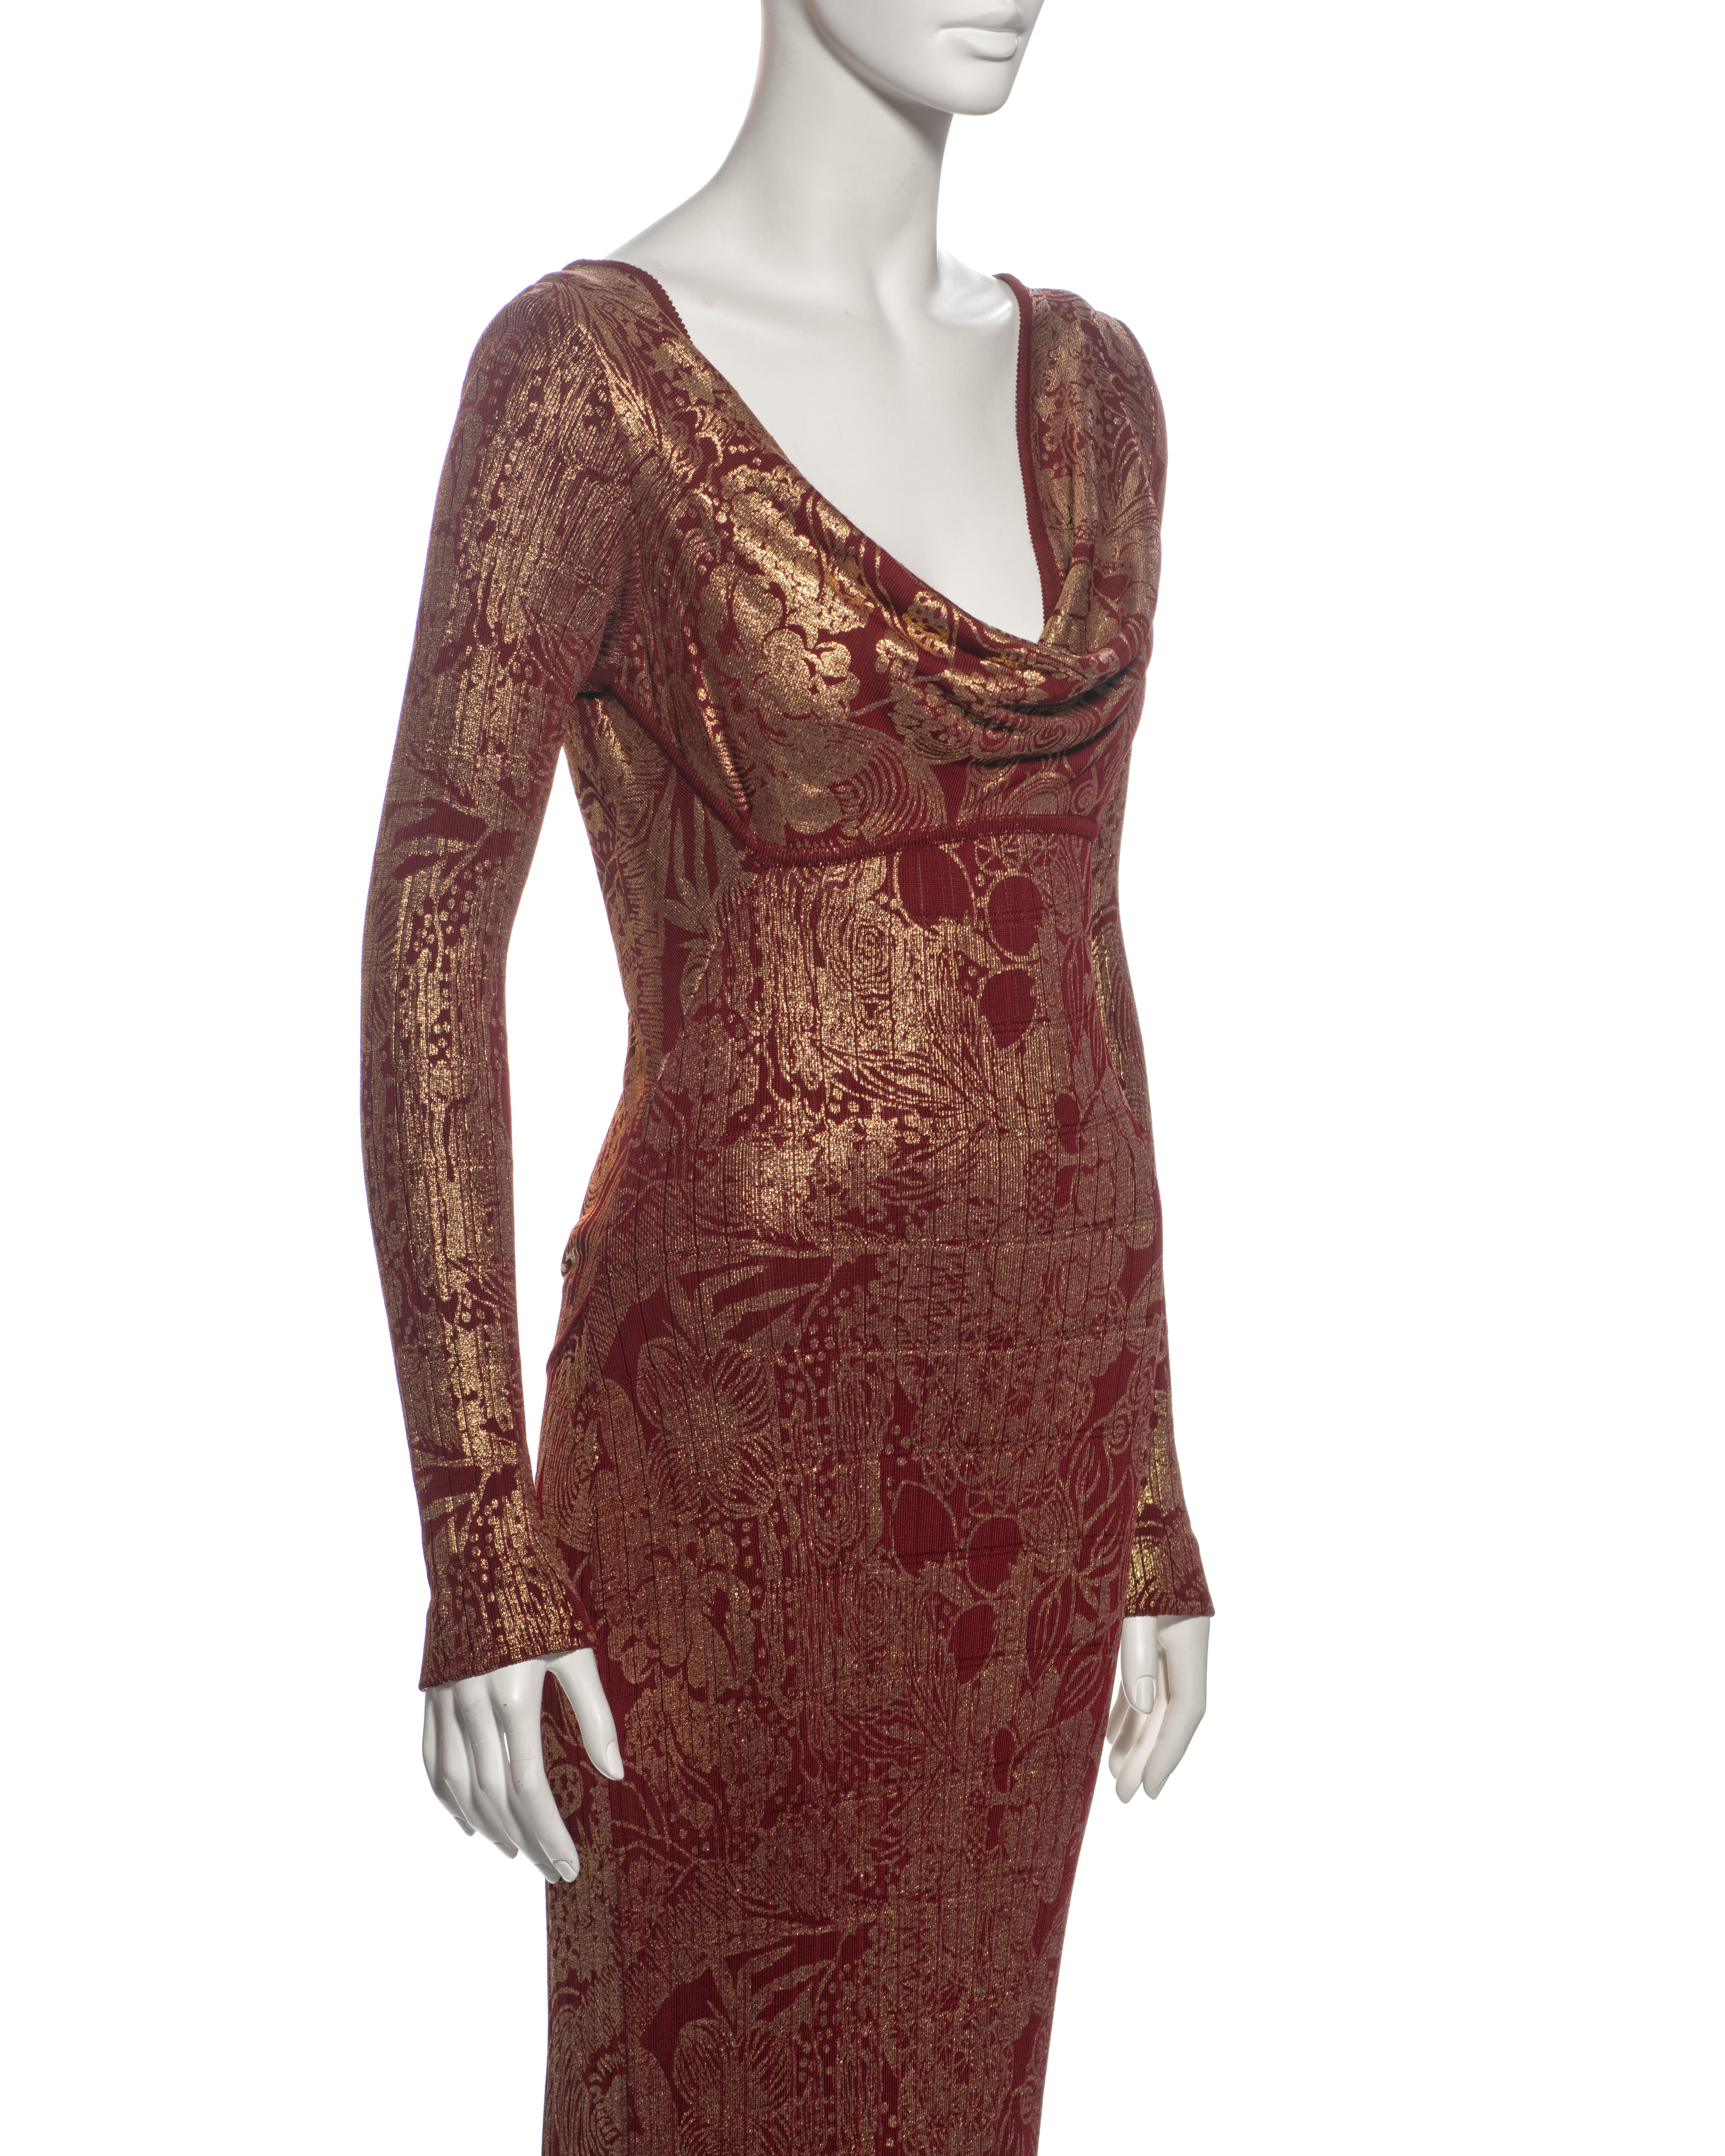 John Galliano Bordeaux Knit Evening Dress with Gold Foil Floral Print, fw 1998 For Sale 1